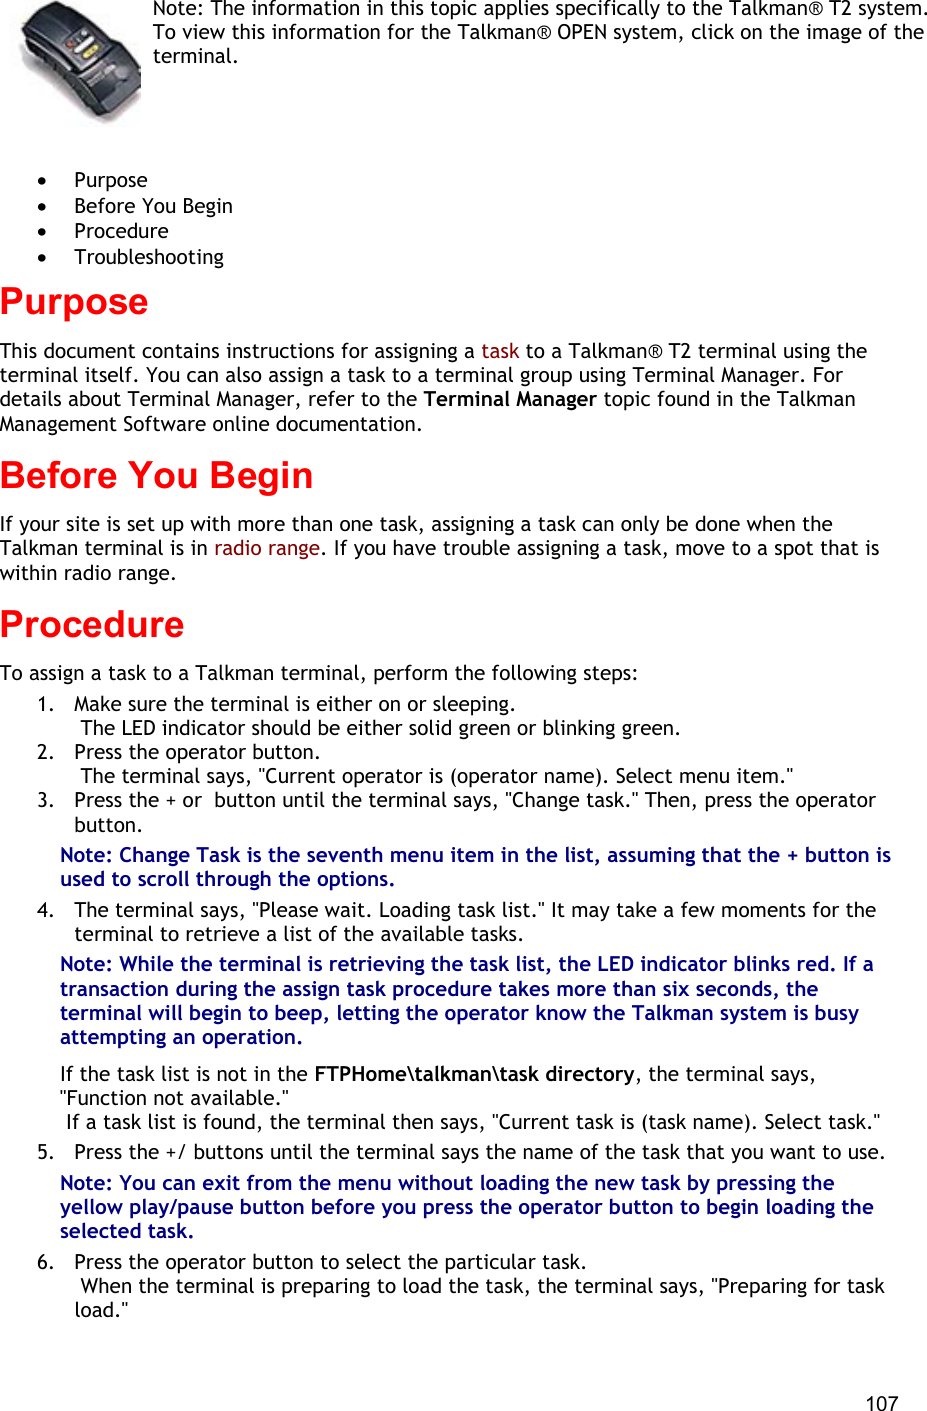  107 Note: The information in this topic applies specifically to the Talkman® T2 system. To view this information for the Talkman® OPEN system, click on the image of the terminal.   •  Purpose •  Before You Begin •  Procedure •  Troubleshooting Purpose This document contains instructions for assigning a task to a Talkman® T2 terminal using the terminal itself. You can also assign a task to a terminal group using Terminal Manager. For details about Terminal Manager, refer to the Terminal Manager topic found in the Talkman Management Software online documentation. Before You Begin If your site is set up with more than one task, assigning a task can only be done when the Talkman terminal is in radio range. If you have trouble assigning a task, move to a spot that is within radio range. Procedure To assign a task to a Talkman terminal, perform the following steps:  1.  Make sure the terminal is either on or sleeping.  The LED indicator should be either solid green or blinking green. 2.  Press the operator button.  The terminal says, &quot;Current operator is (operator name). Select menu item.&quot; 3.  Press the + or  button until the terminal says, &quot;Change task.&quot; Then, press the operator button.  Note: Change Task is the seventh menu item in the list, assuming that the + button is used to scroll through the options. 4.  The terminal says, &quot;Please wait. Loading task list.&quot; It may take a few moments for the terminal to retrieve a list of the available tasks. Note: While the terminal is retrieving the task list, the LED indicator blinks red. If a transaction during the assign task procedure takes more than six seconds, the terminal will begin to beep, letting the operator know the Talkman system is busy attempting an operation. If the task list is not in the FTPHome\talkman\task directory, the terminal says, &quot;Function not available.&quot;   If a task list is found, the terminal then says, &quot;Current task is (task name). Select task.&quot; 5.  Press the +/ buttons until the terminal says the name of the task that you want to use. Note: You can exit from the menu without loading the new task by pressing the yellow play/pause button before you press the operator button to begin loading the selected task. 6.  Press the operator button to select the particular task.  When the terminal is preparing to load the task, the terminal says, &quot;Preparing for task load.&quot; 